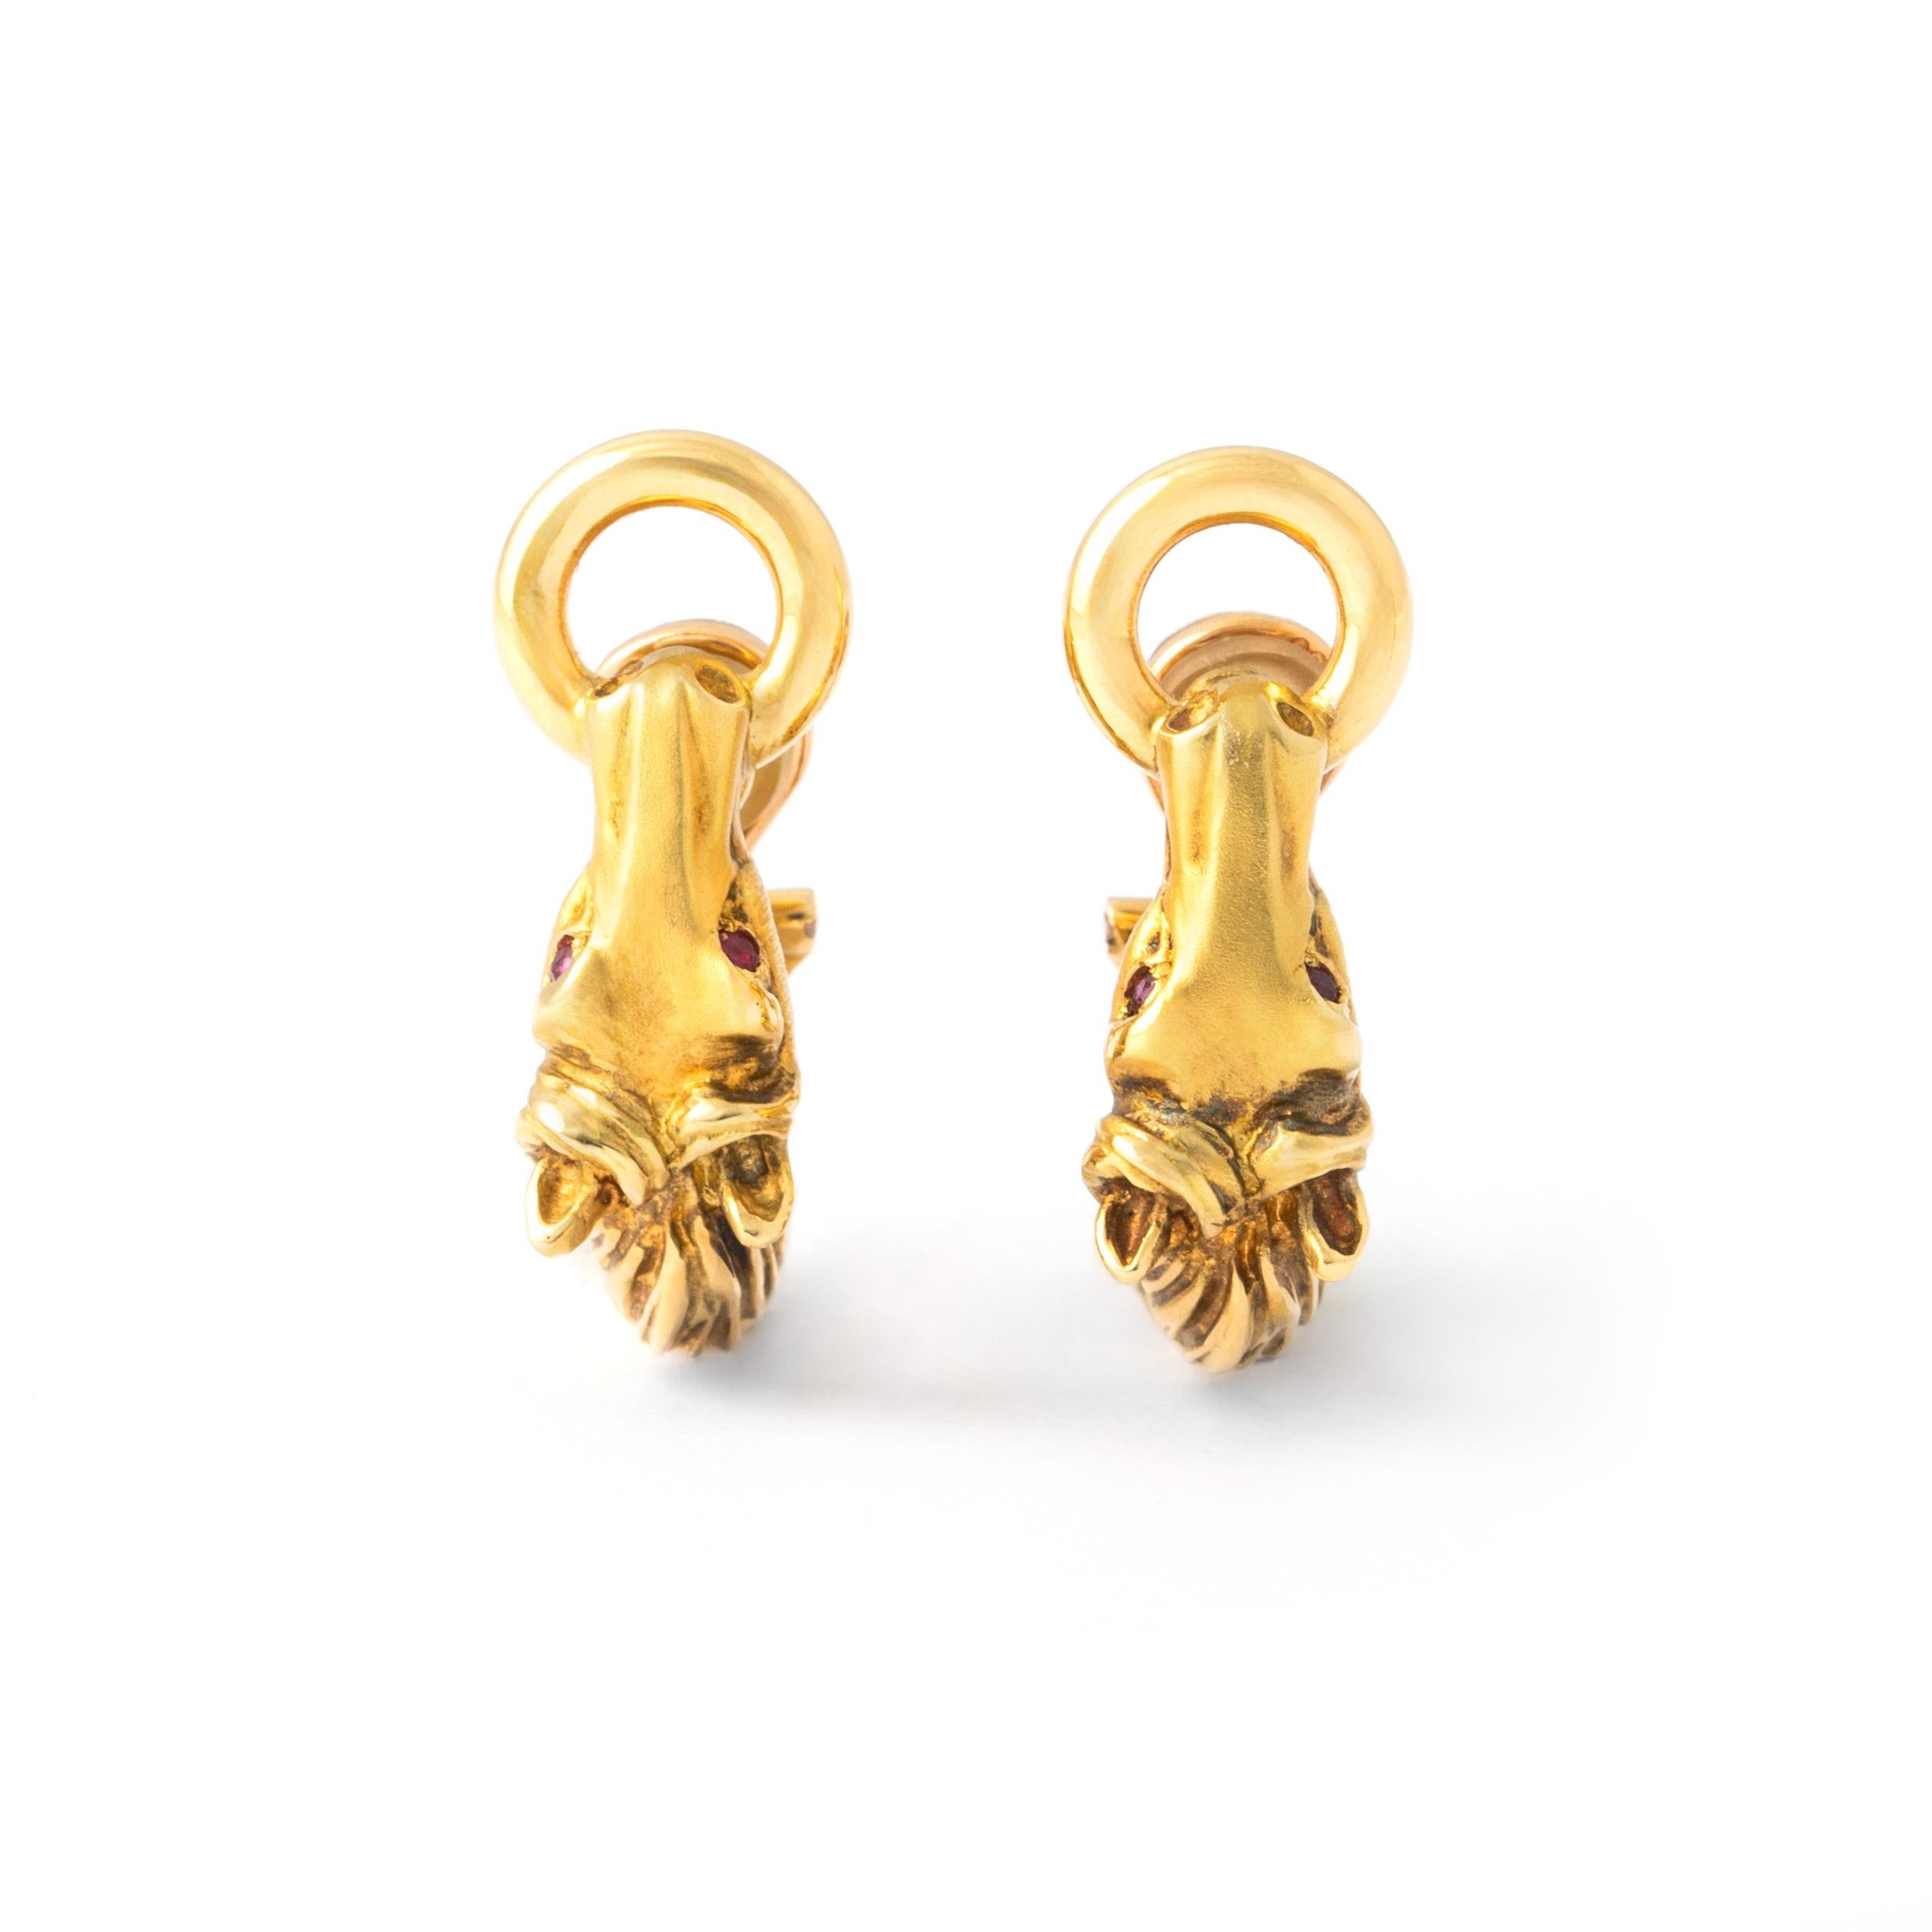 Ruby 18K Yellow Gold Horse Head Earrings.
Total weight: 16.93 grams.
Height: 2.60 centimeters.
Width: 0.40 centimeters up to 0.90 centimeters.